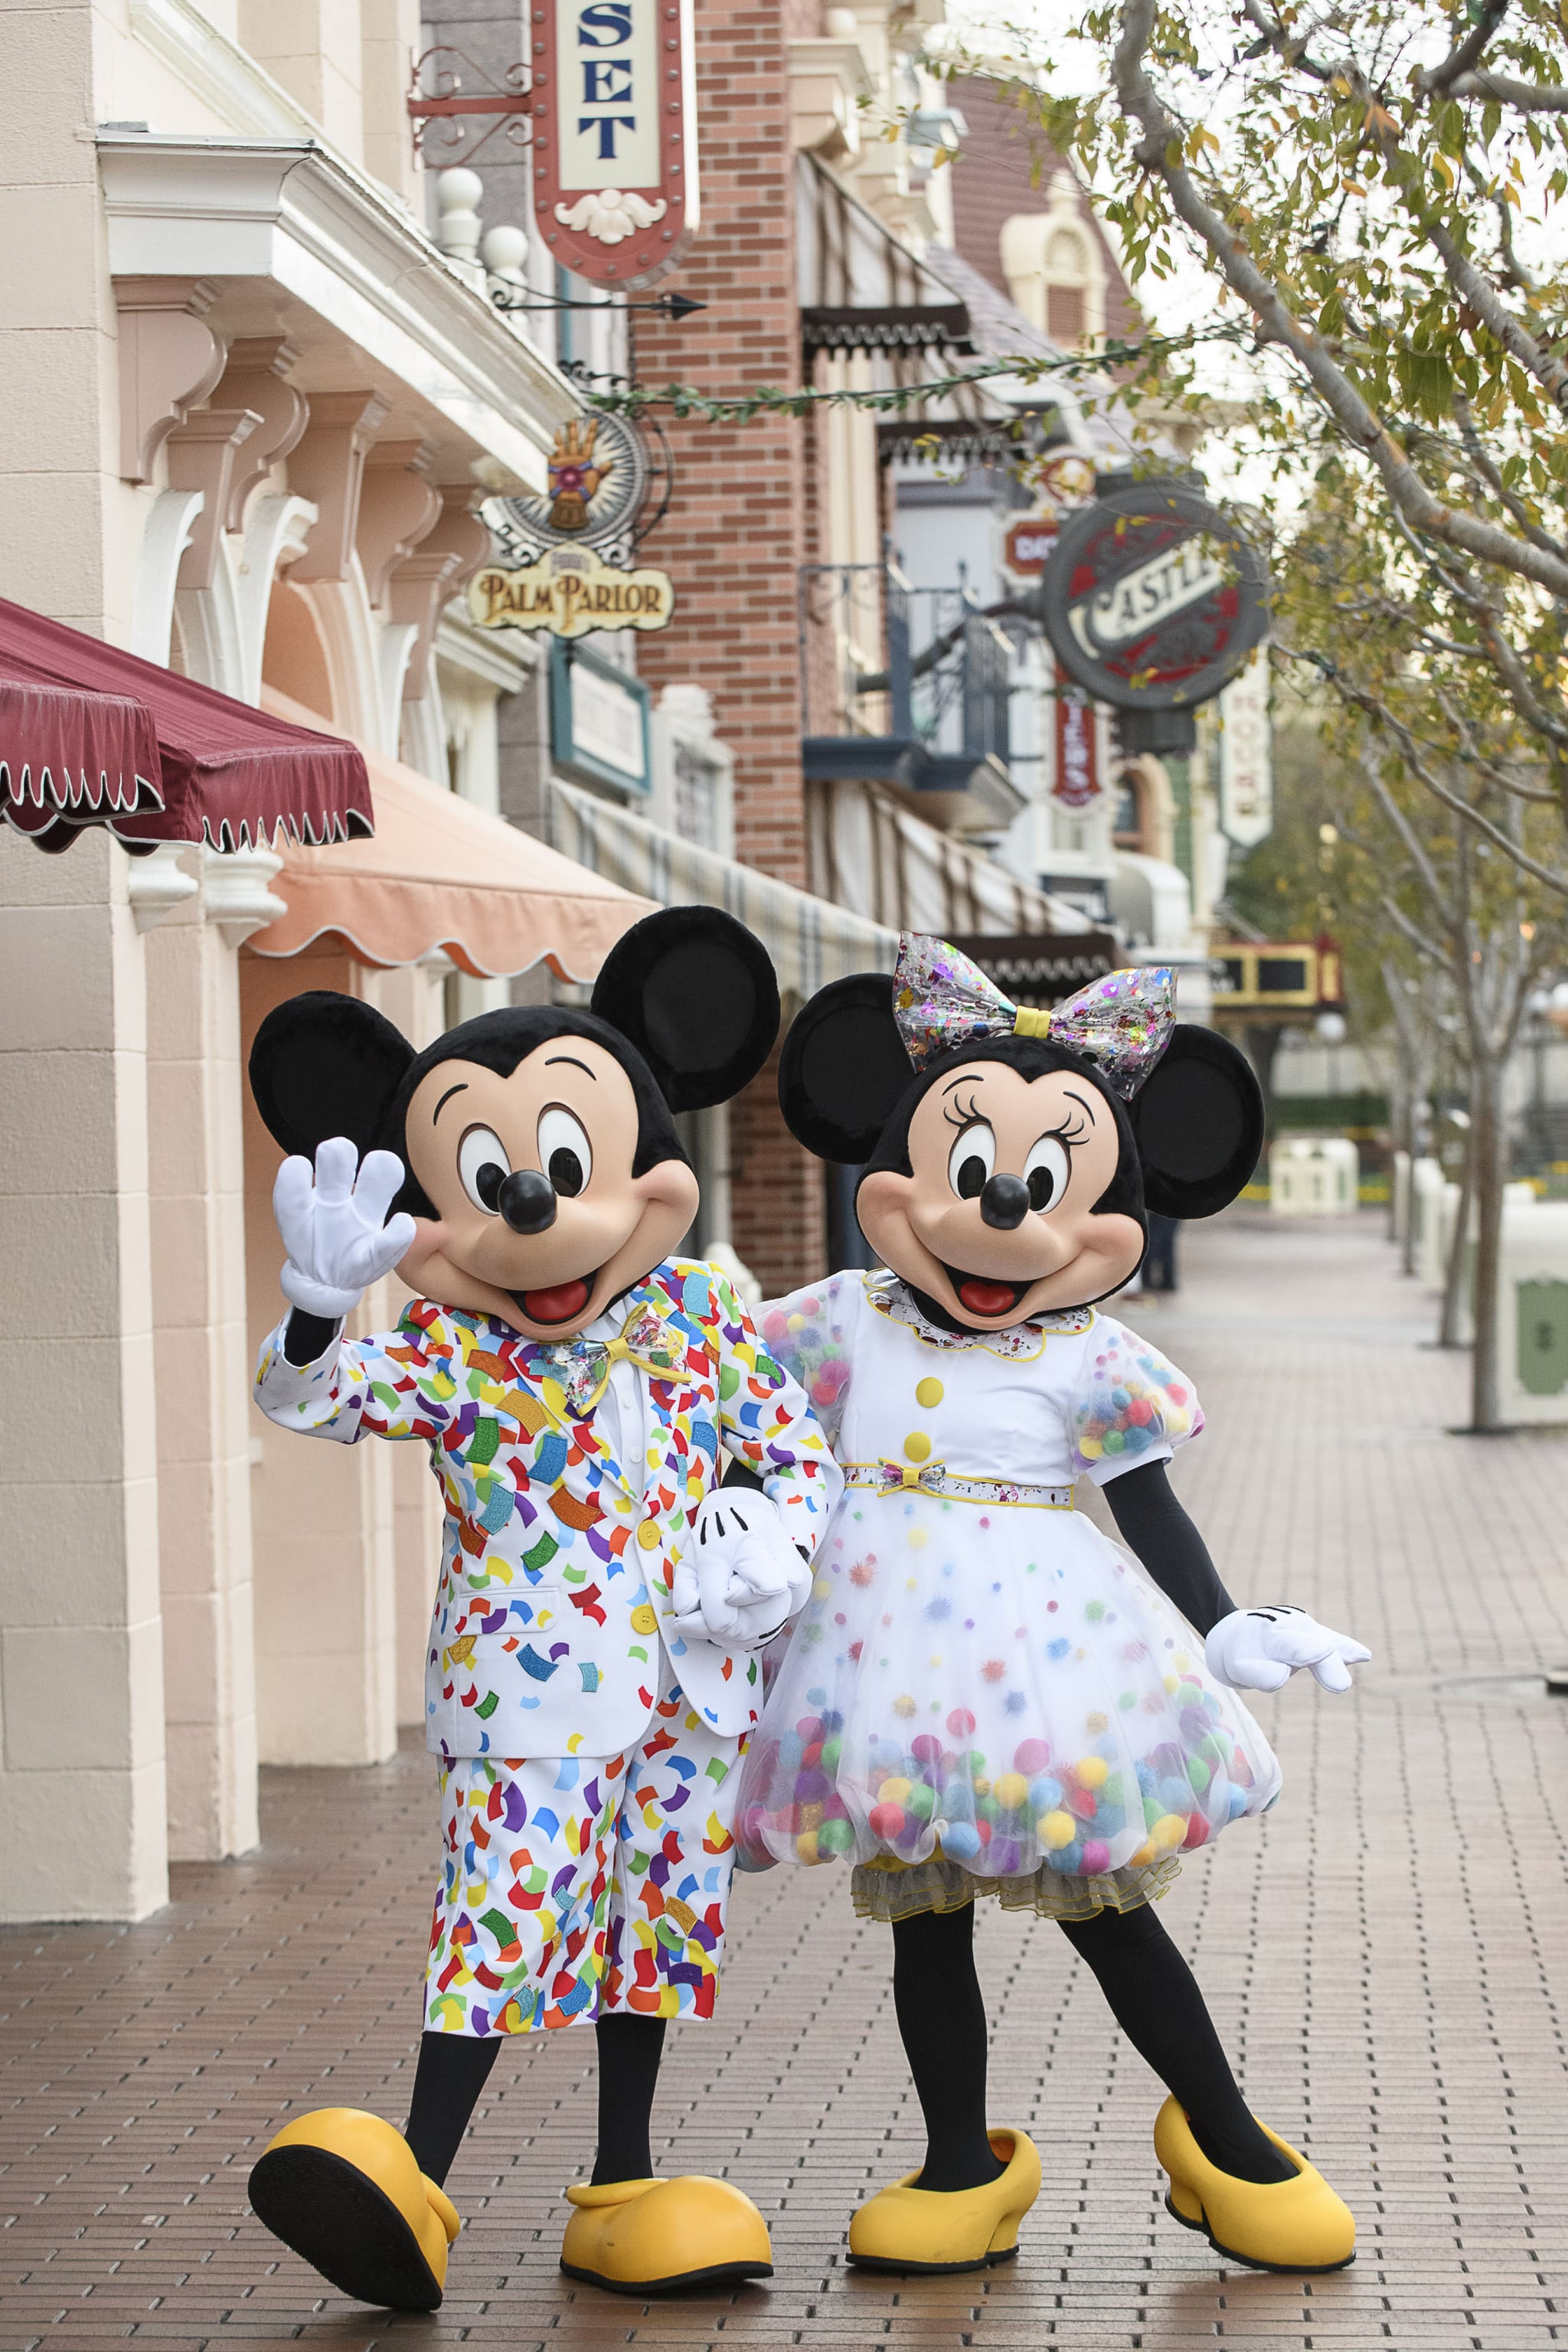 Mickey Mouse and Minnie Mouse don new outfits bursting with colour to commemorate 90 years of magic in celebrations across Disney Parks. Beginning in January 2019 at the Disneyland Resort in Anaheim, Calif., guests are invited to Get Your Ears On - A Mickey and Minnie Celebration. The special party will feature new entertainment and decor at Disneyland park, plus limited-time food and beverage offerings and festive merchandise available throughout the resort. (Richard Harbaugh/Disneyland Resort)